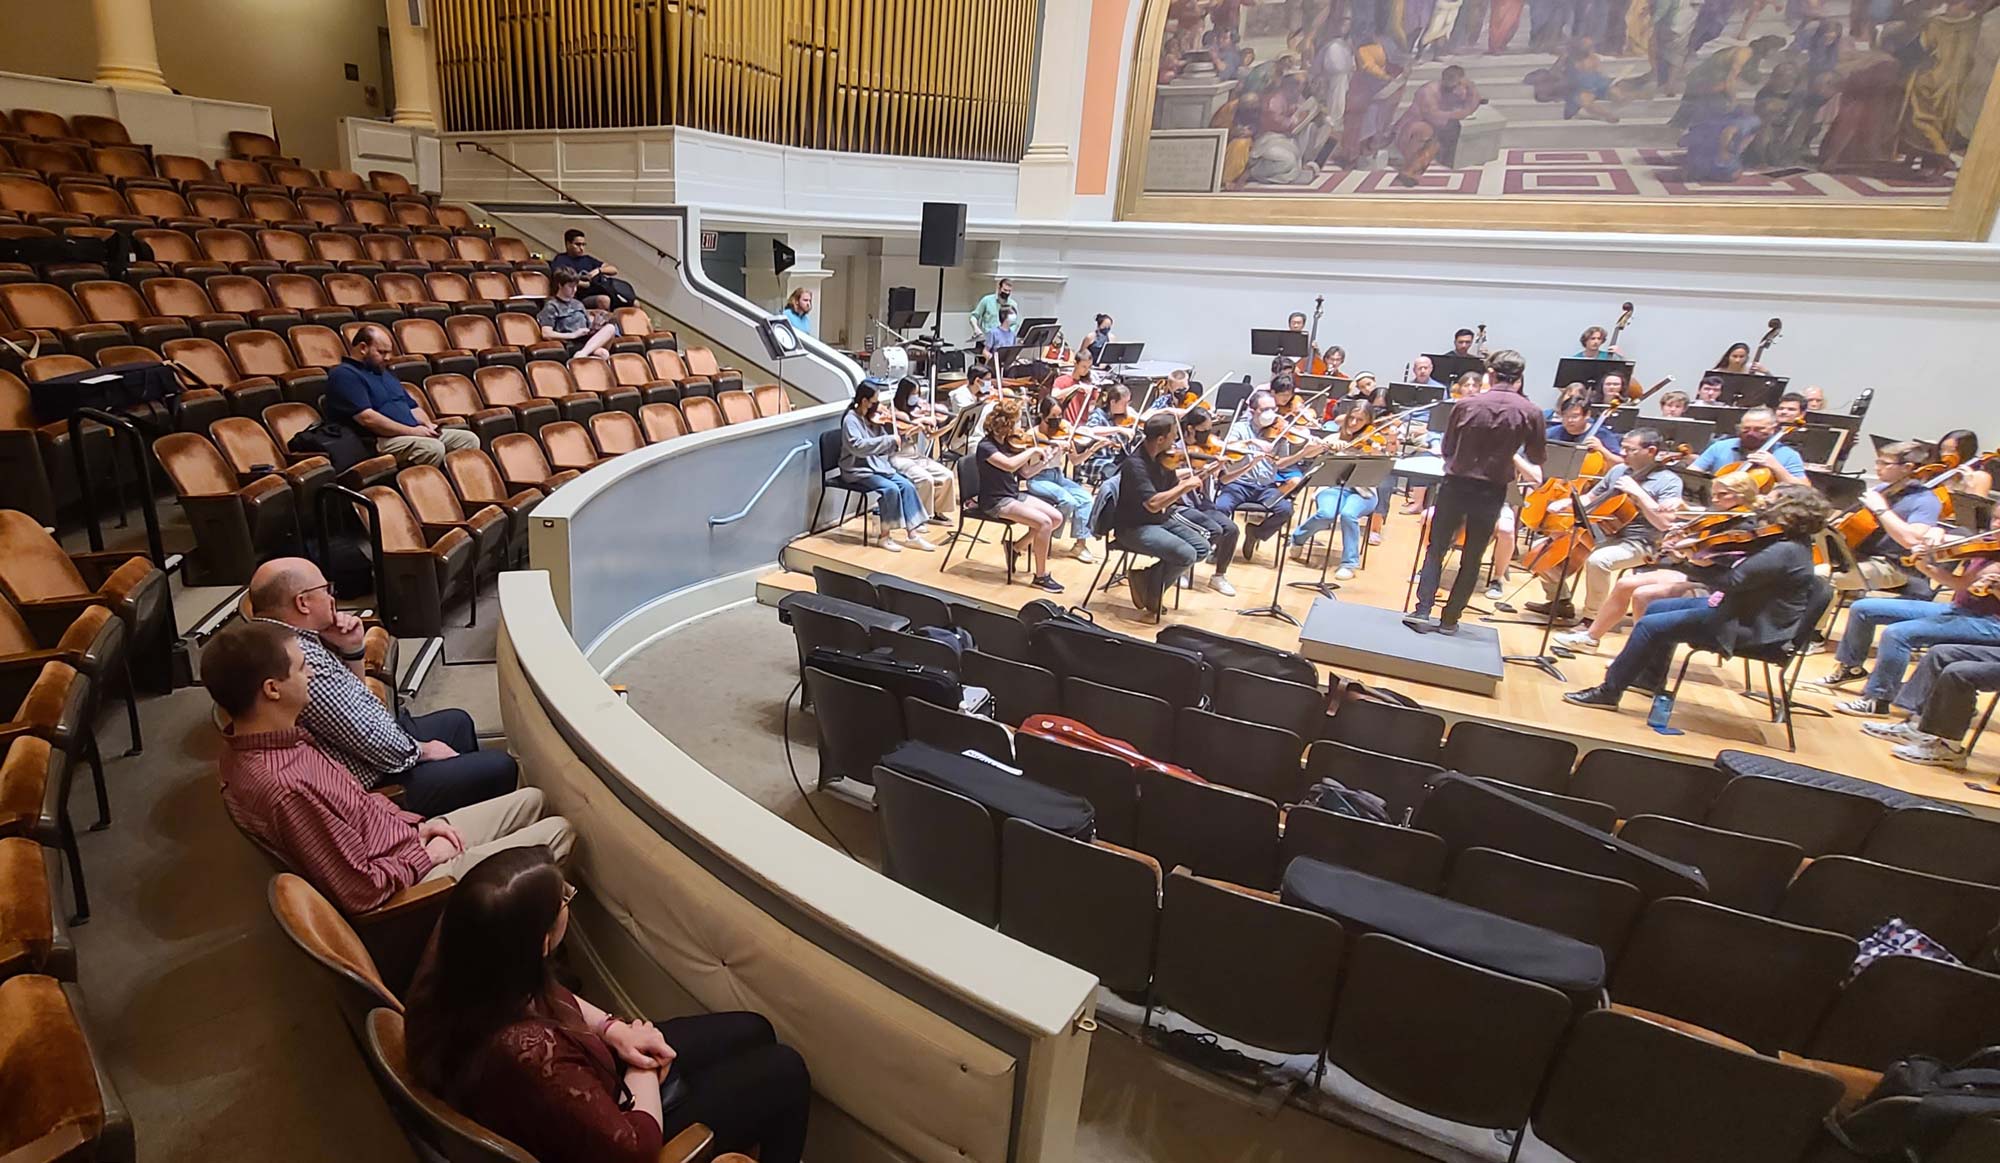 Several people are scattered amongst the auditorium seats, watching the symphony rehearse